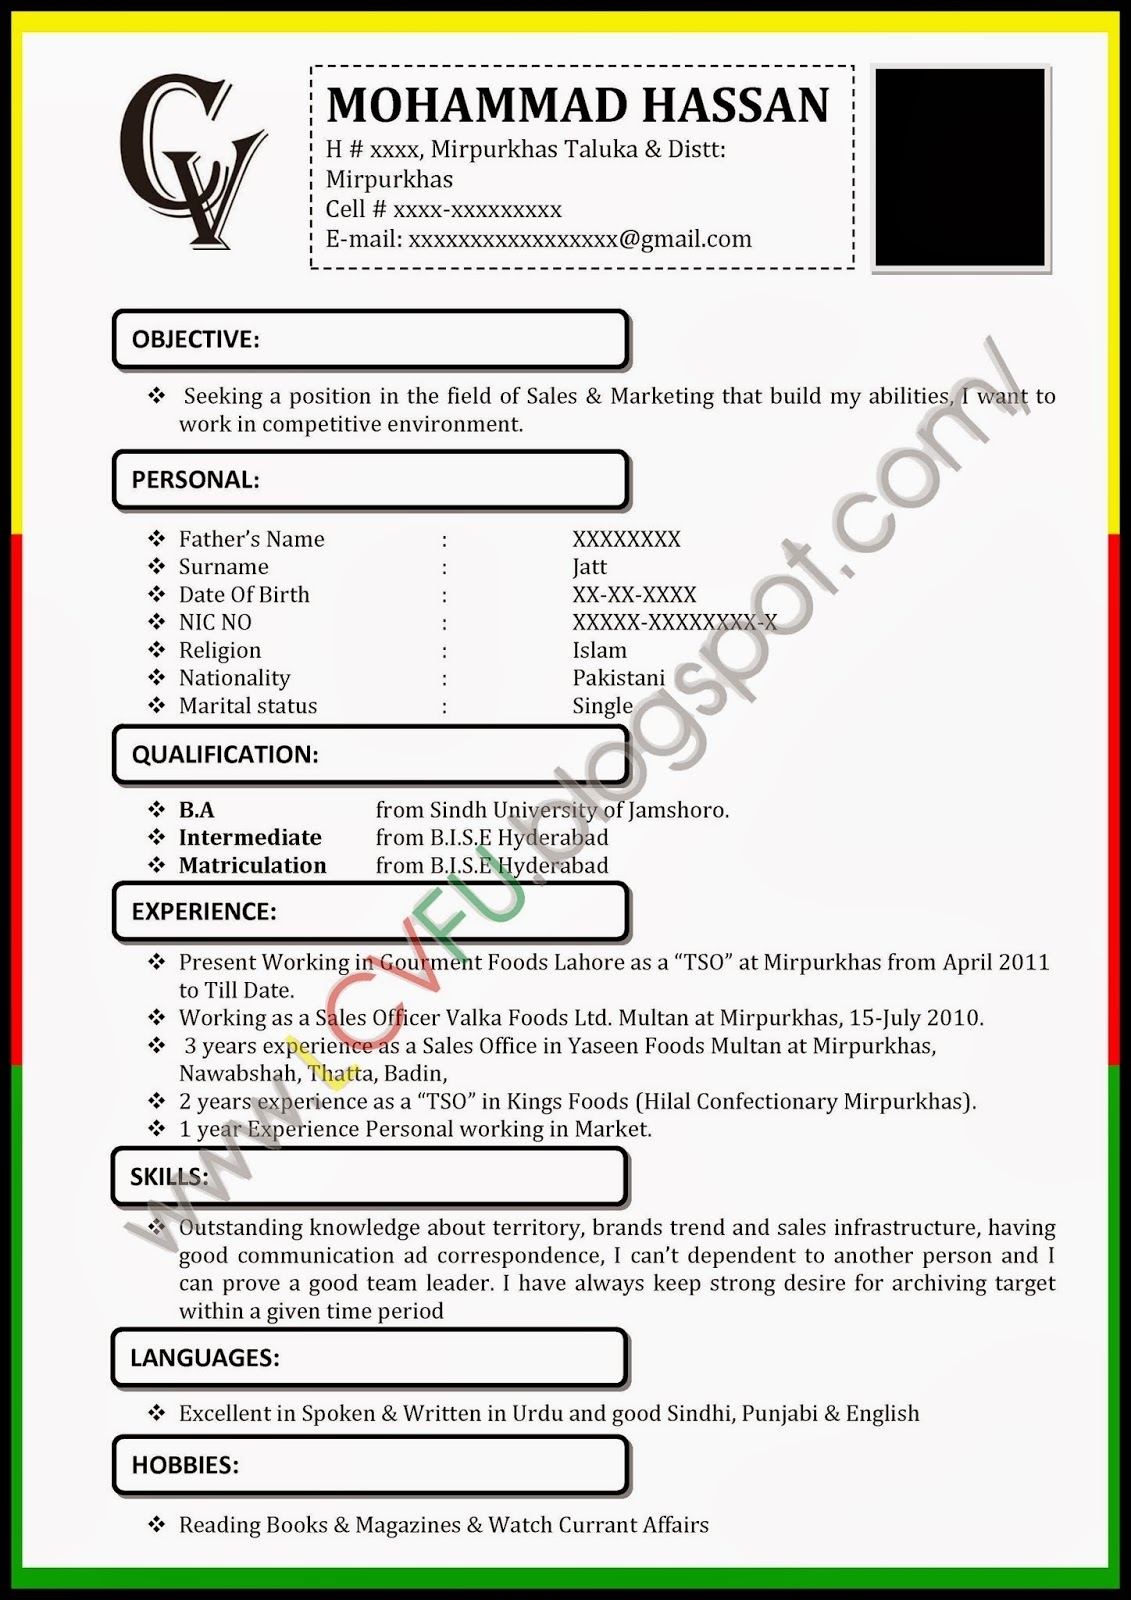 Latest Cv Formats Updates : Ms Word Cv Format, Latest Cv Format 2014 Regarding How To Create A Cv Template In Word